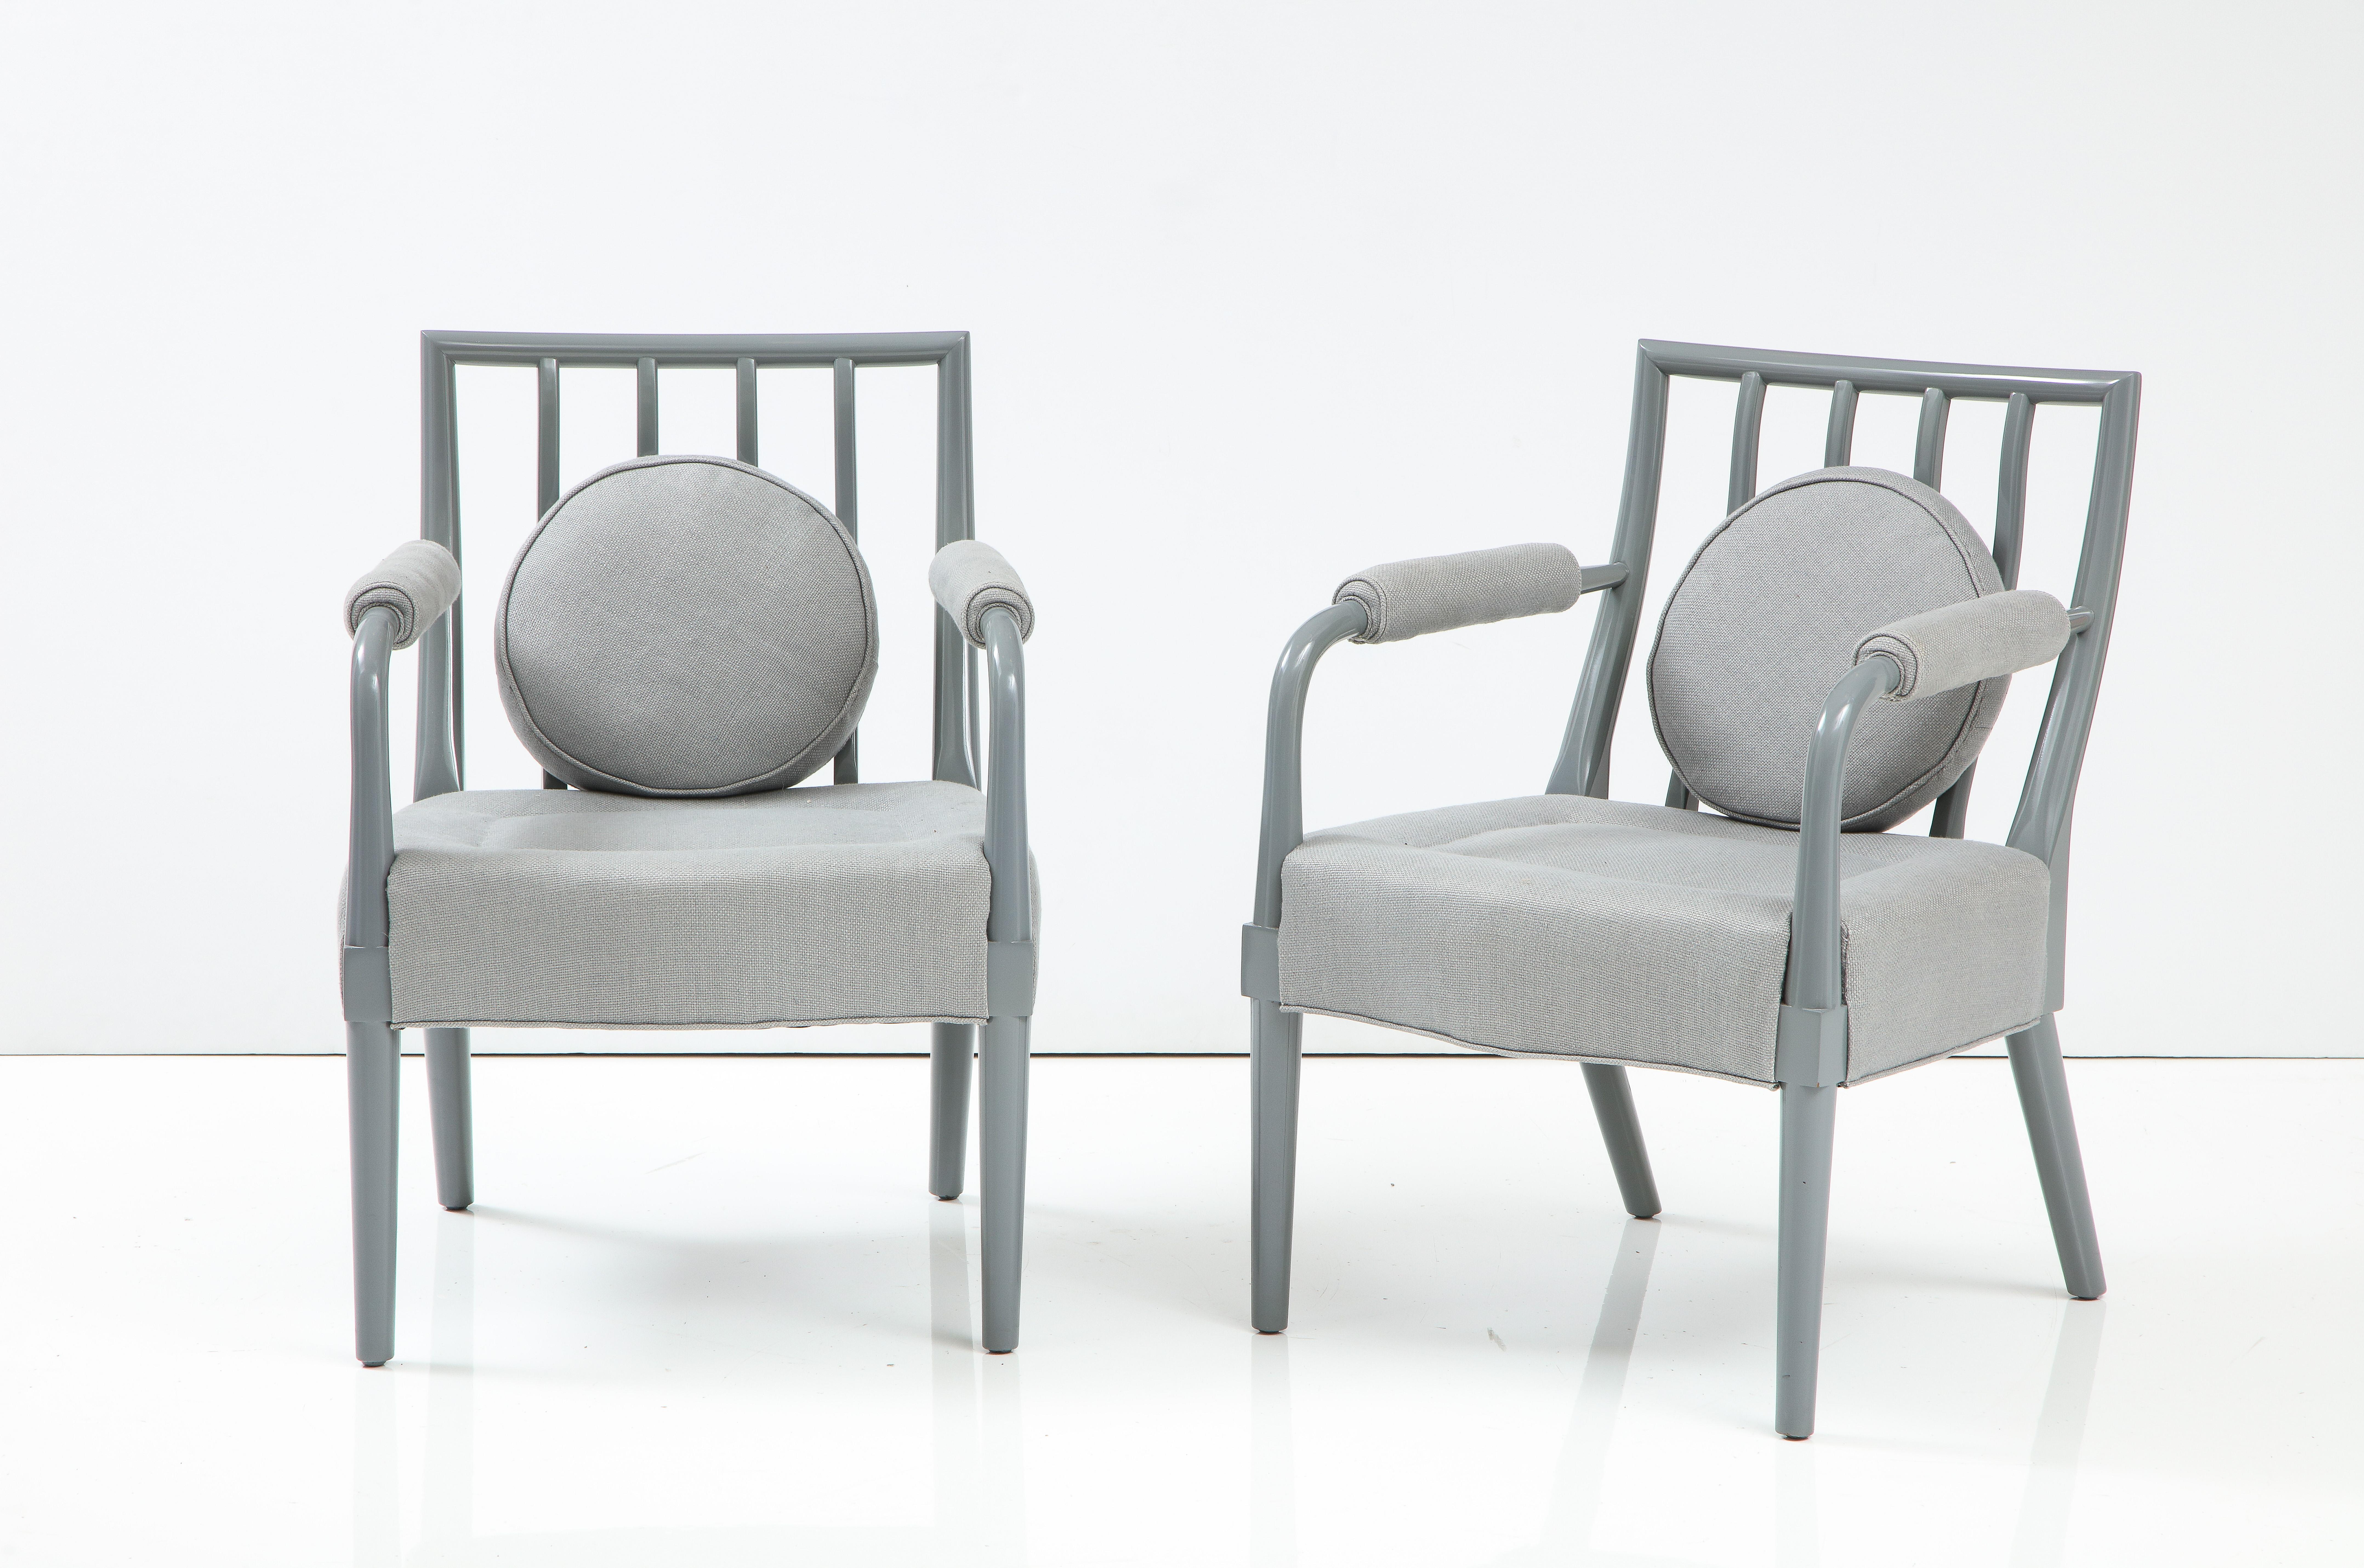 Mid-Century Modern Pair of Armchairs by T.H. Robsjohn-Gibbings, United States, c. 1950 For Sale